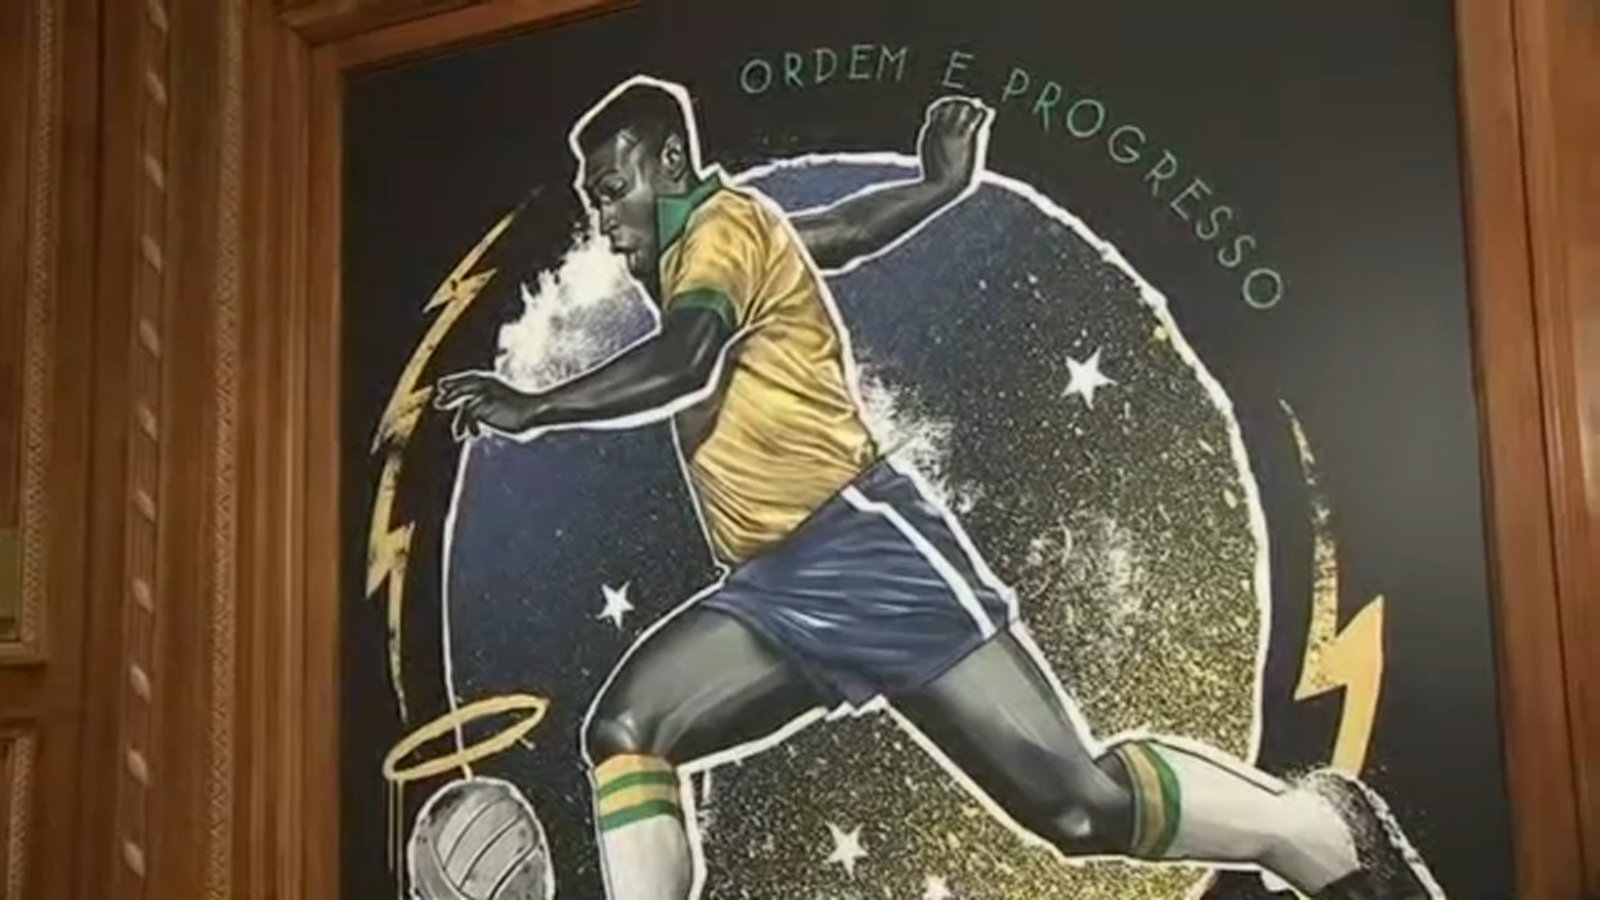 Fans pay tribute to soccer legend at Pelé store in Times Square